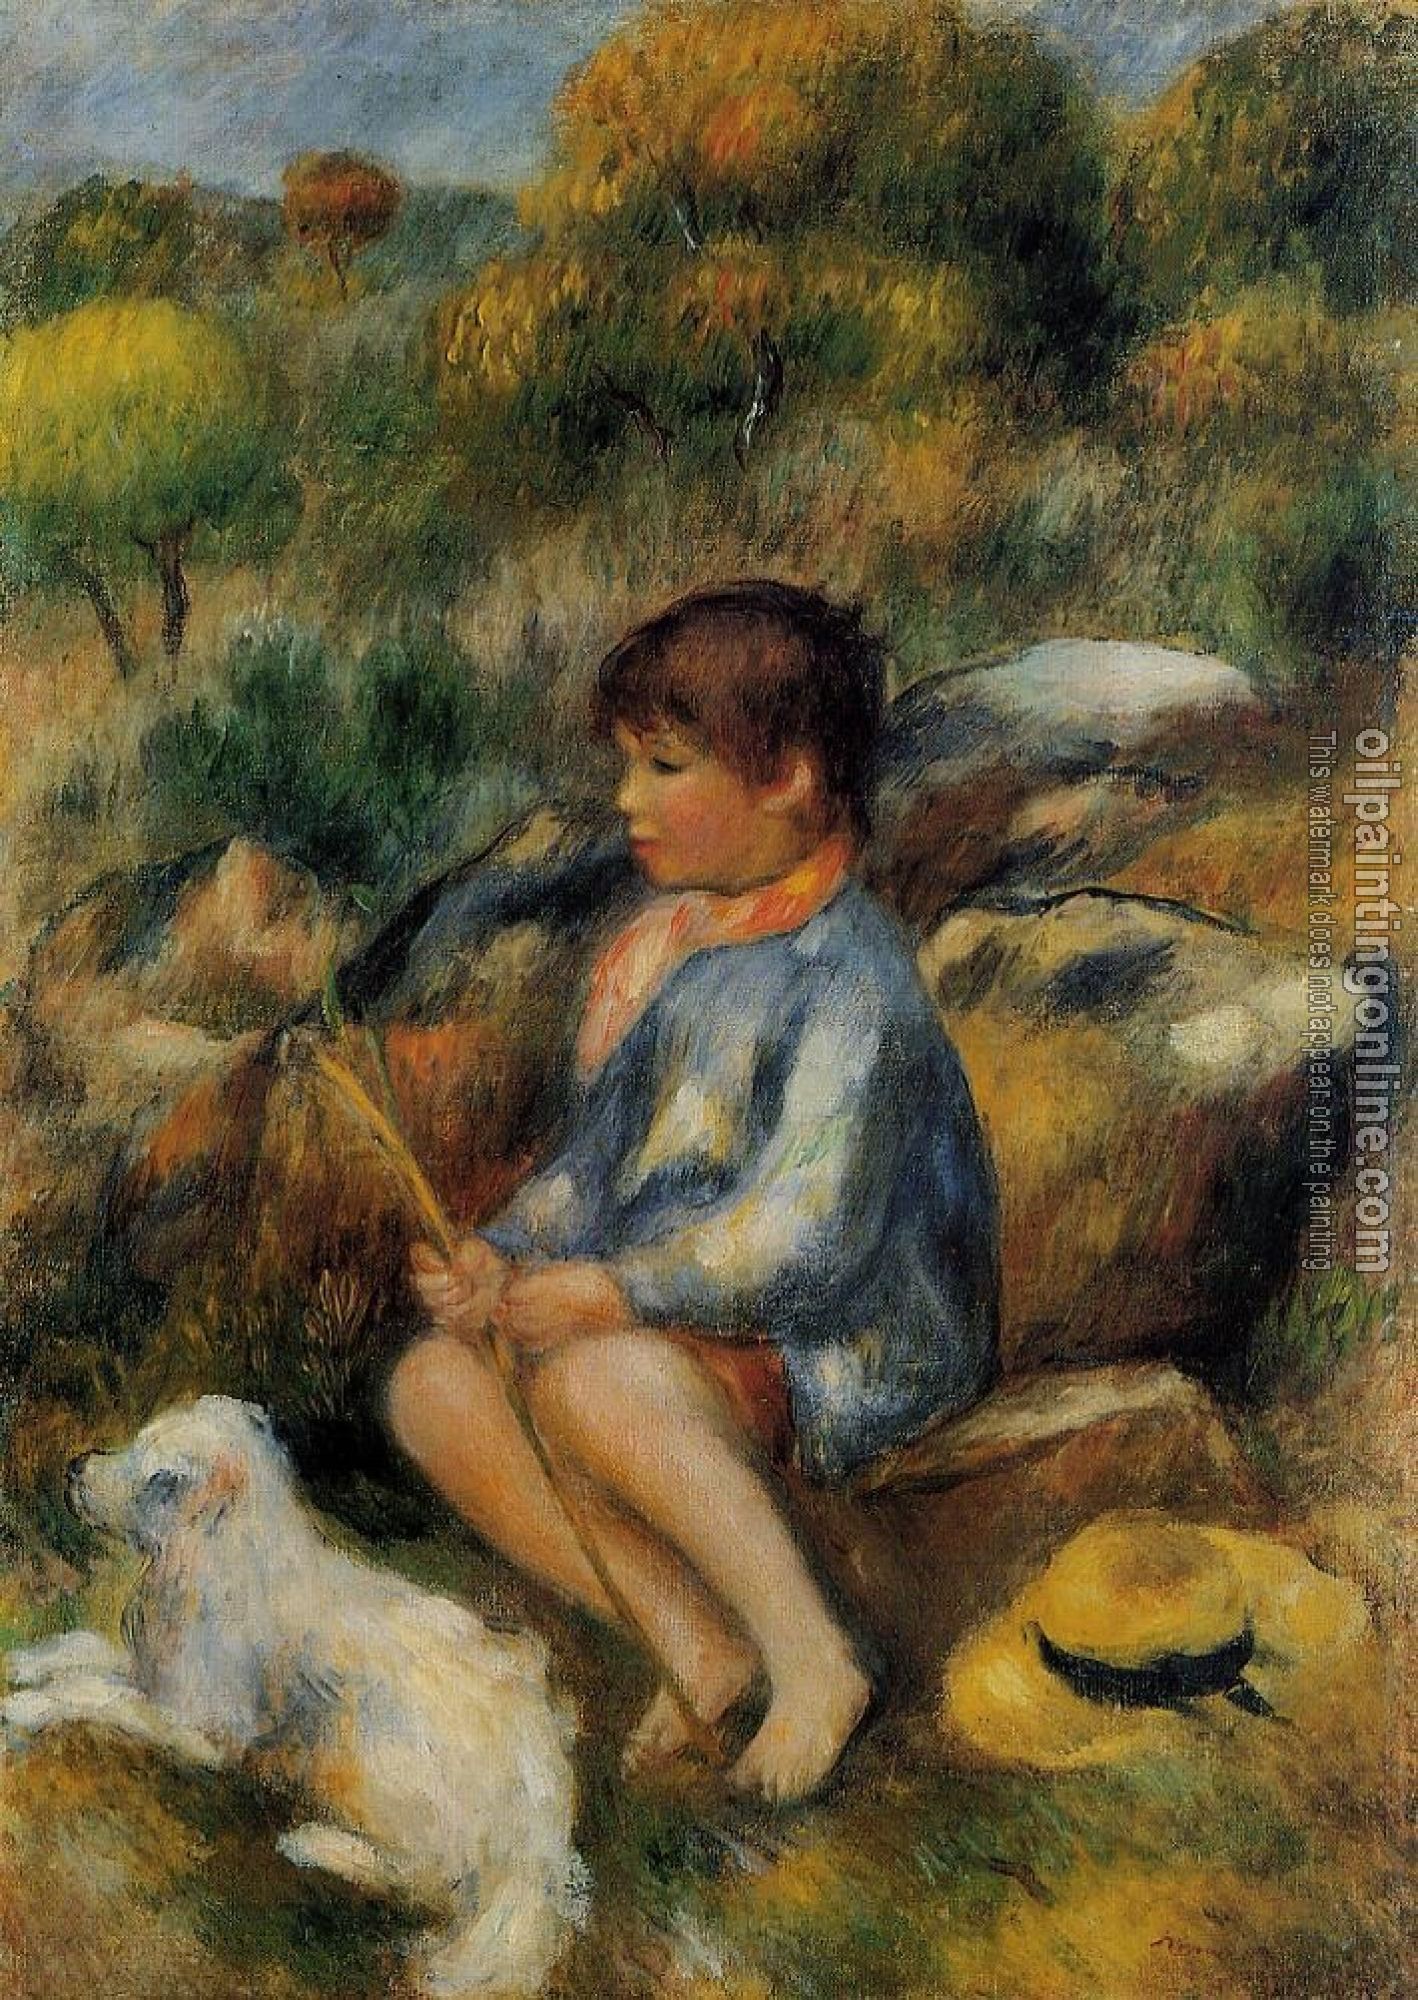 Renoir, Pierre Auguste - Young Boy at the Stream